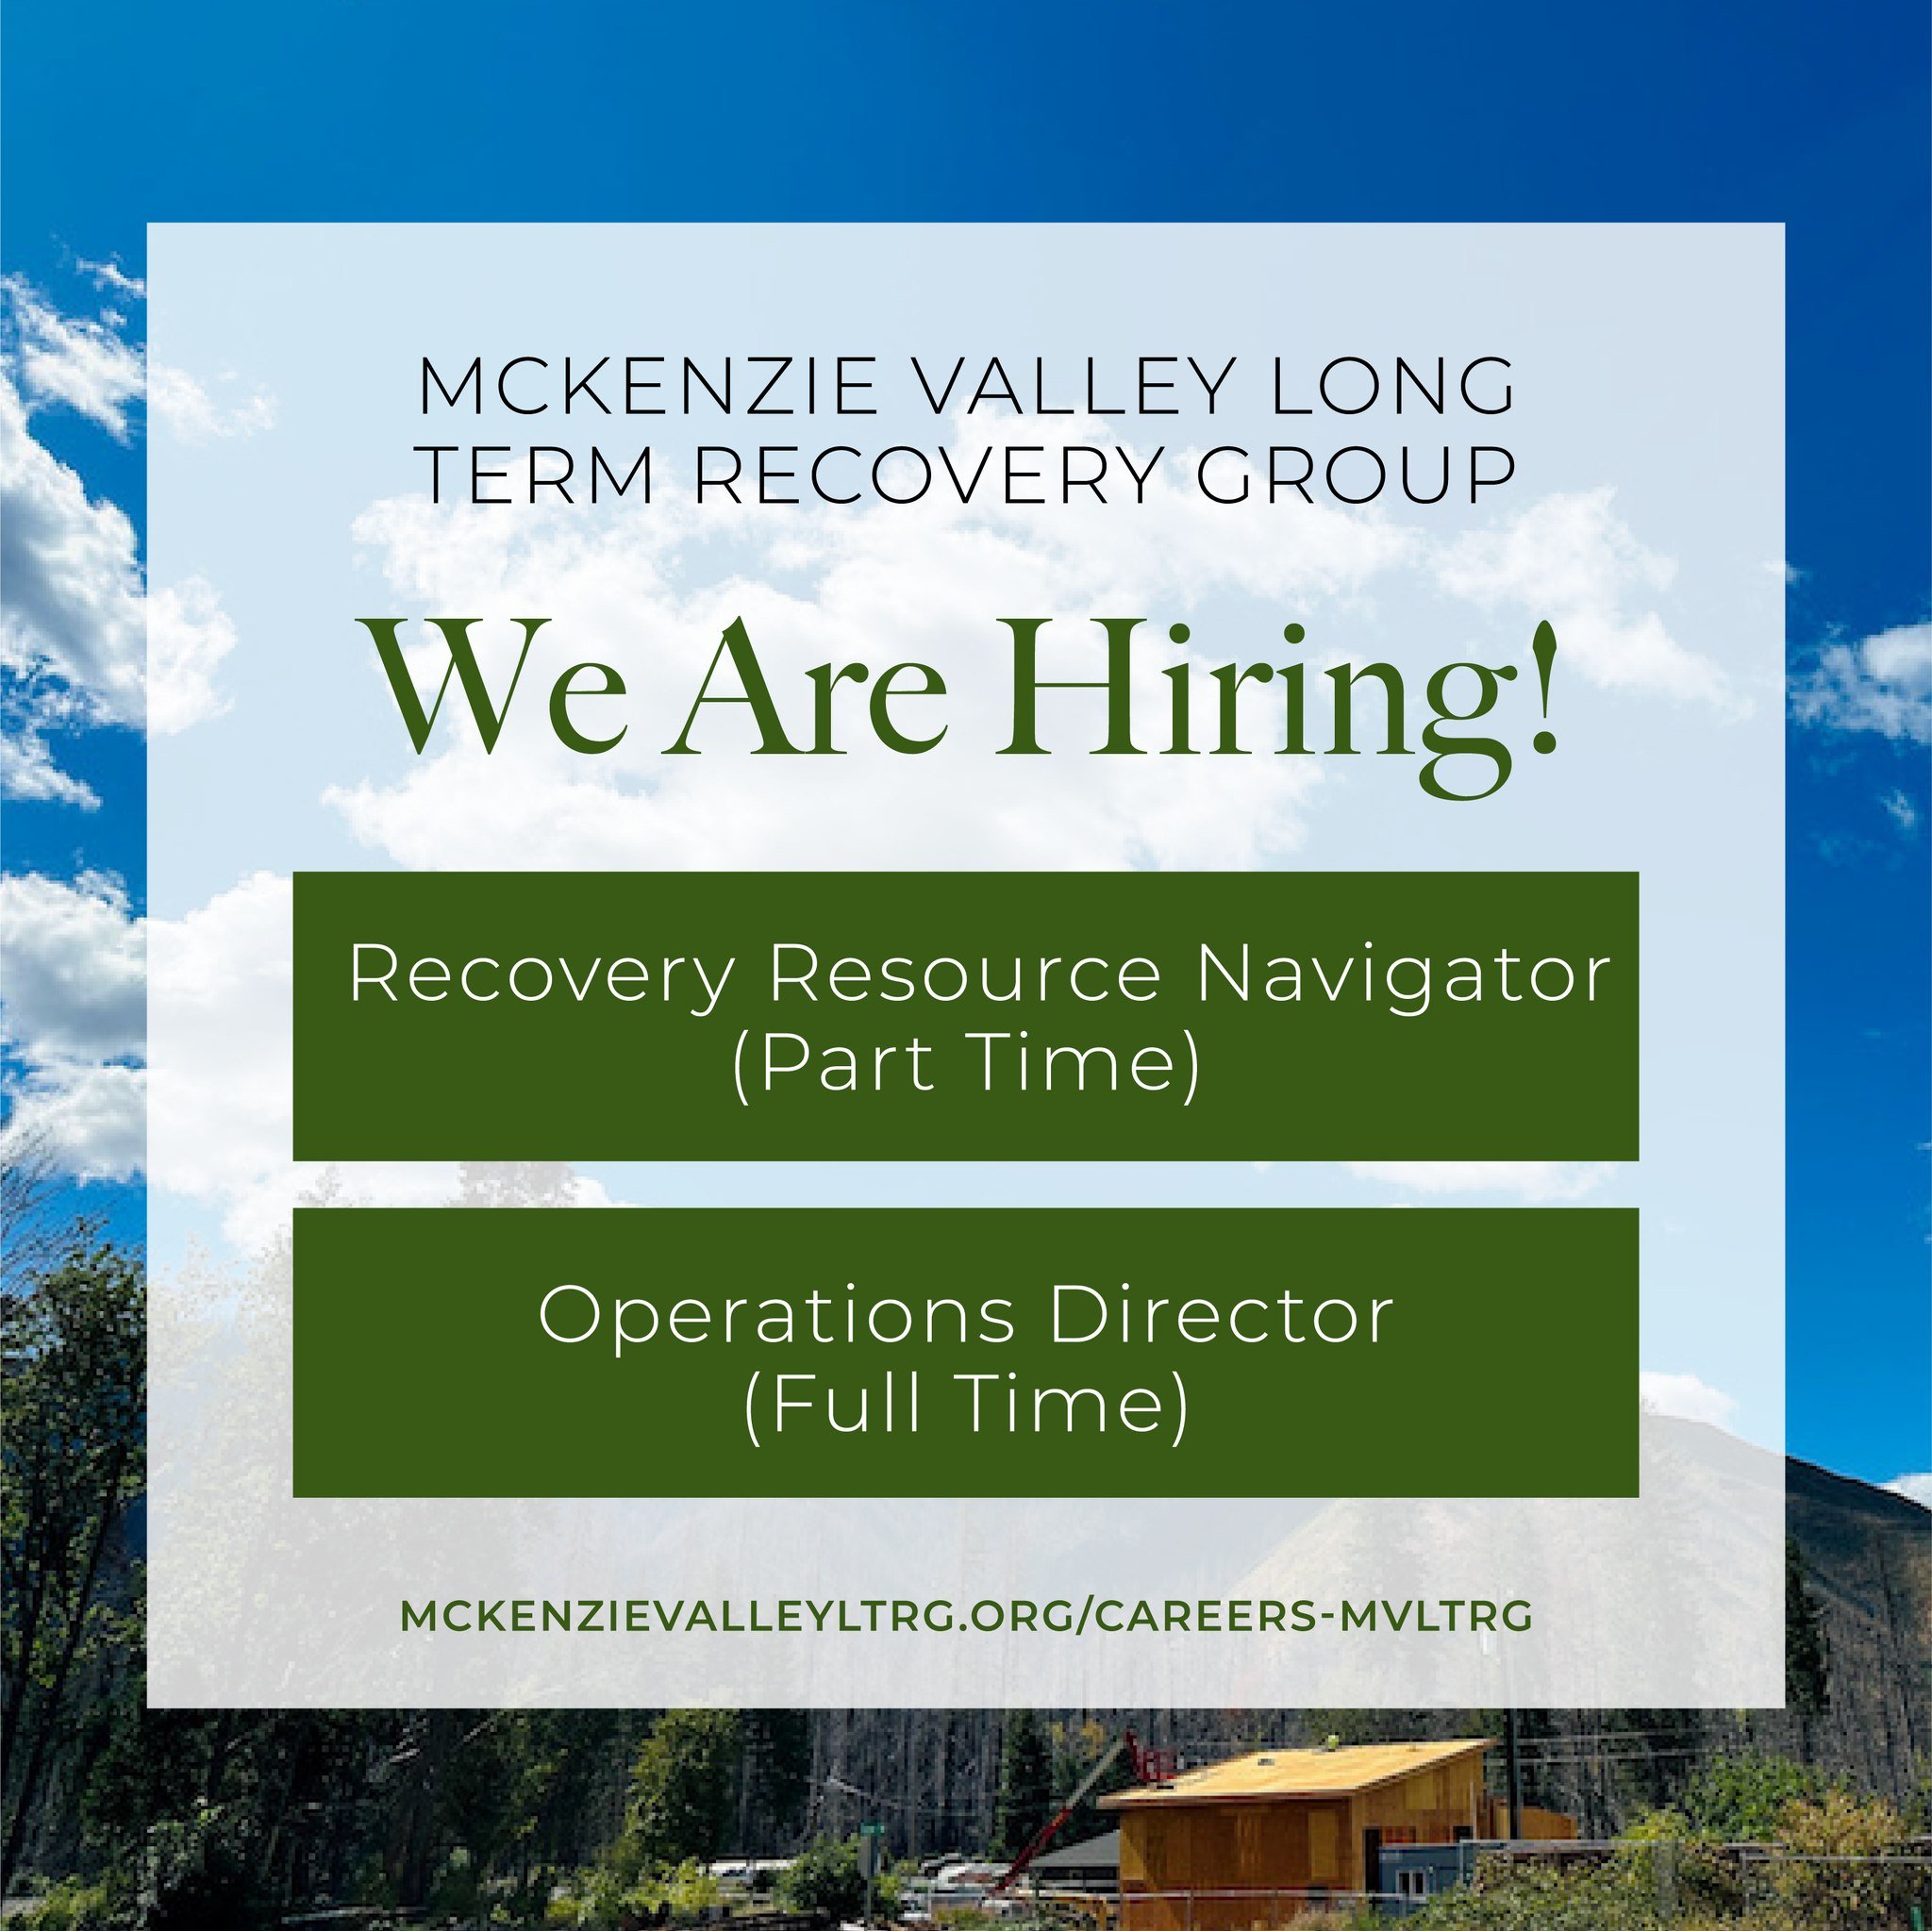 Join our team! We're excited to announce that McKenzie Valley Long Term Recovery Group is hiring for two positions: a part-time Recovery Resource Navigator, and a full-time Operations Director. If you're passionate about making a difference in disast